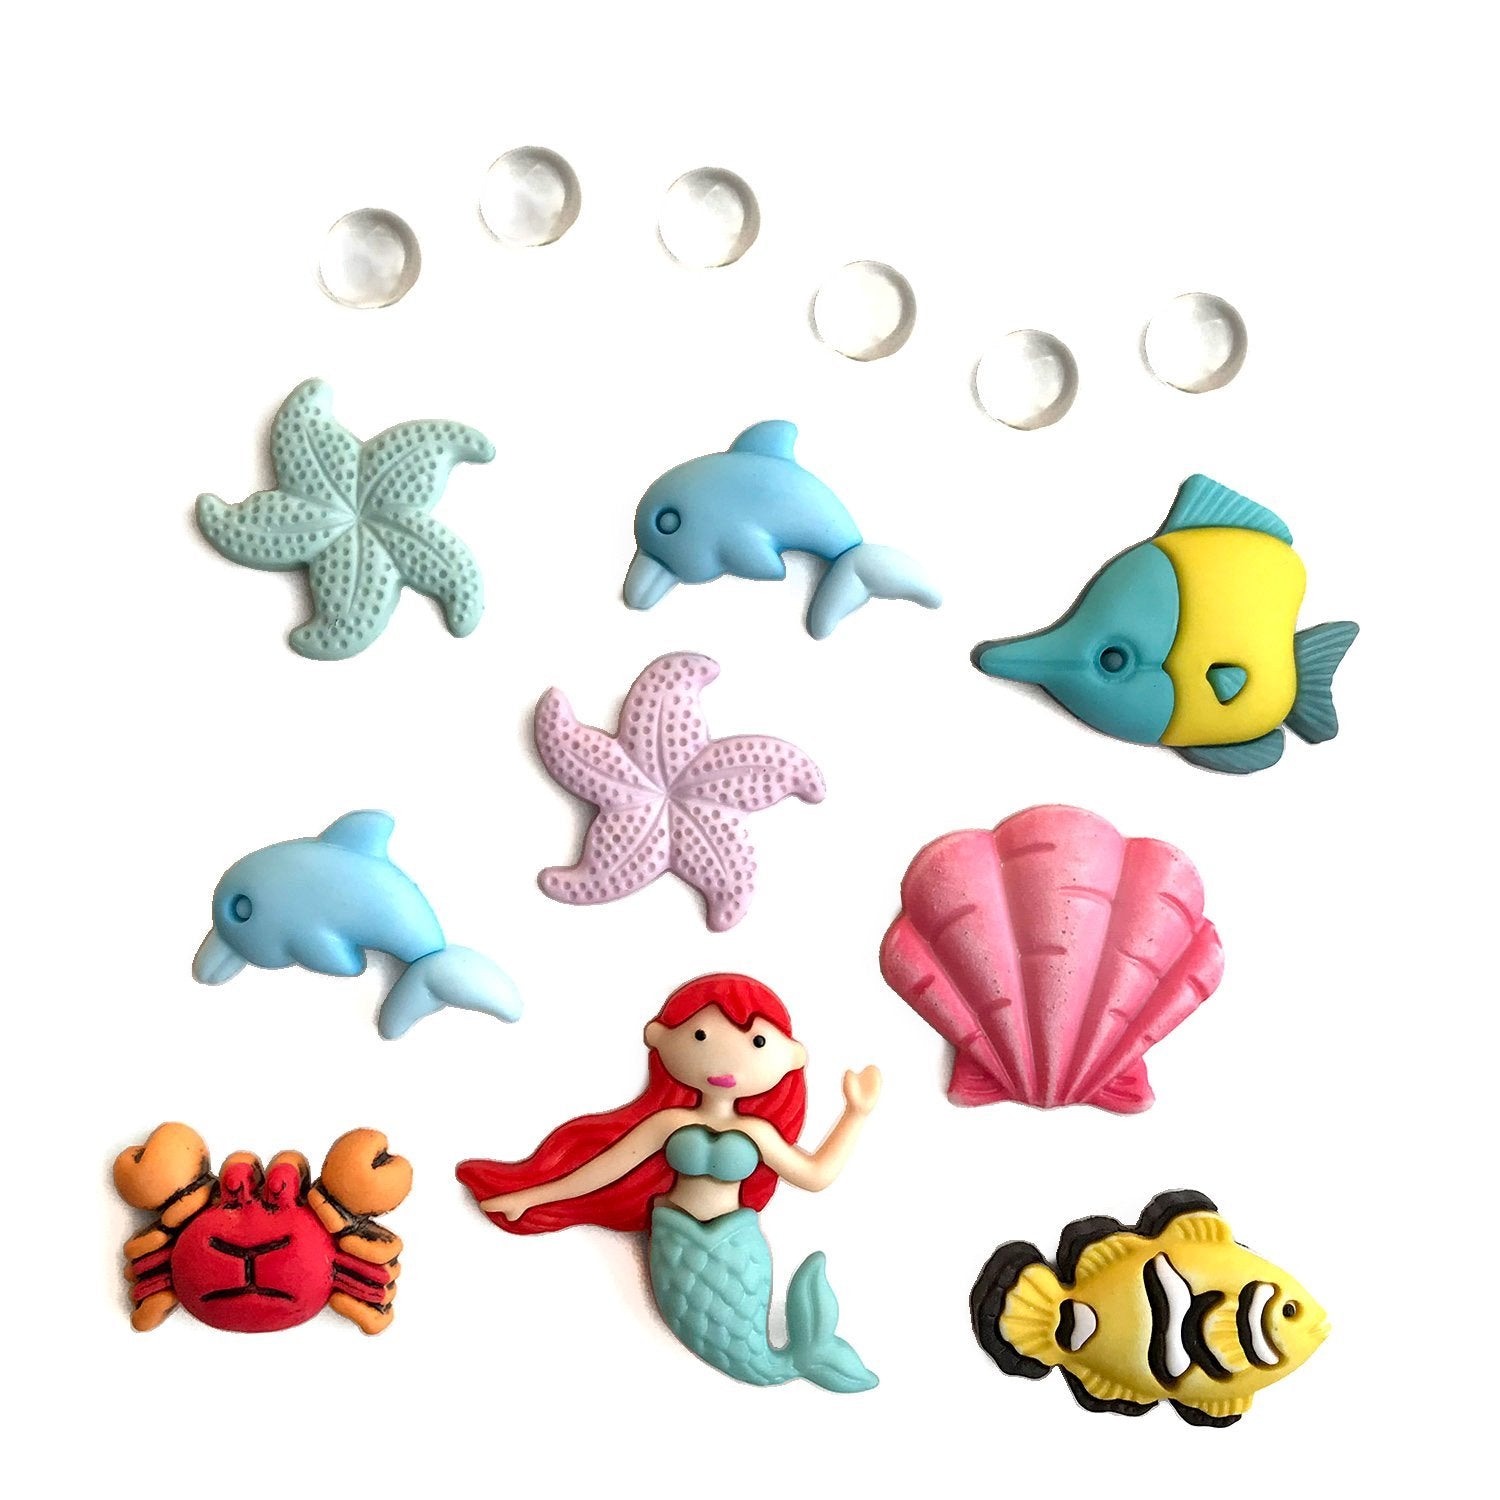 Under The Sea - Buttons Galore and More